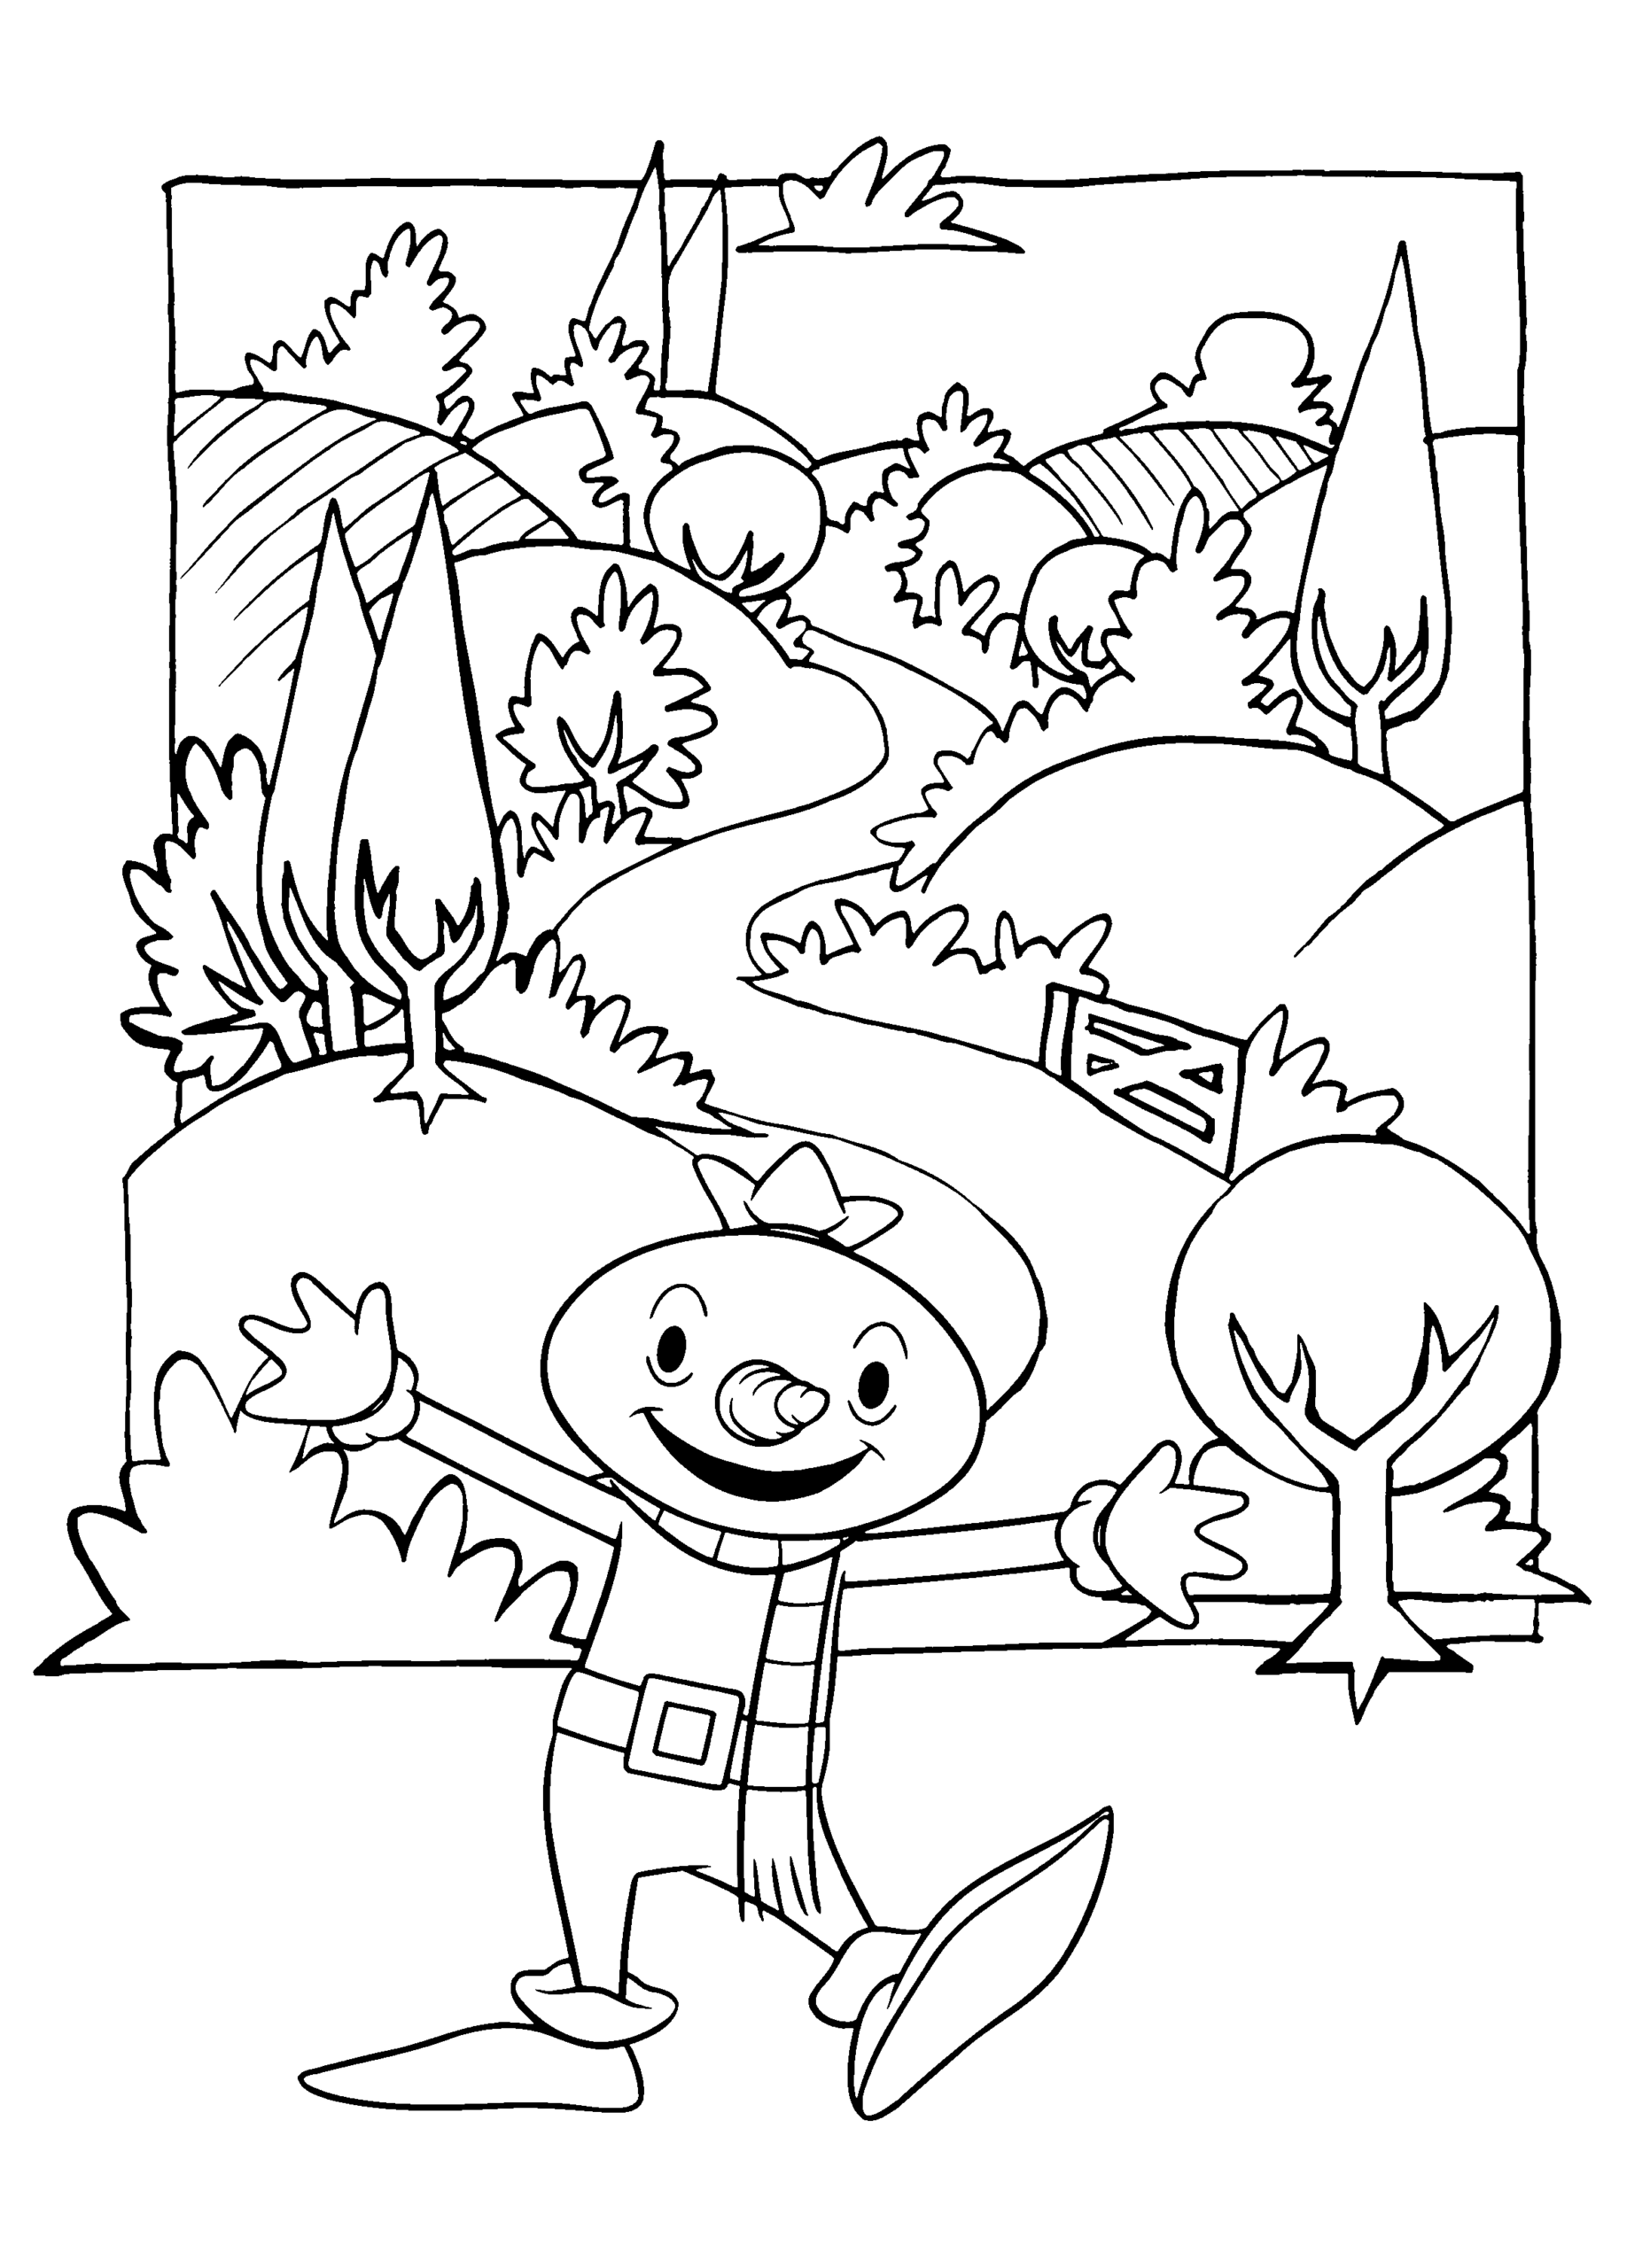 Bob the Builder Coloring Pages TV Film bob the builder 21 Printable 2020 01037 Coloring4free